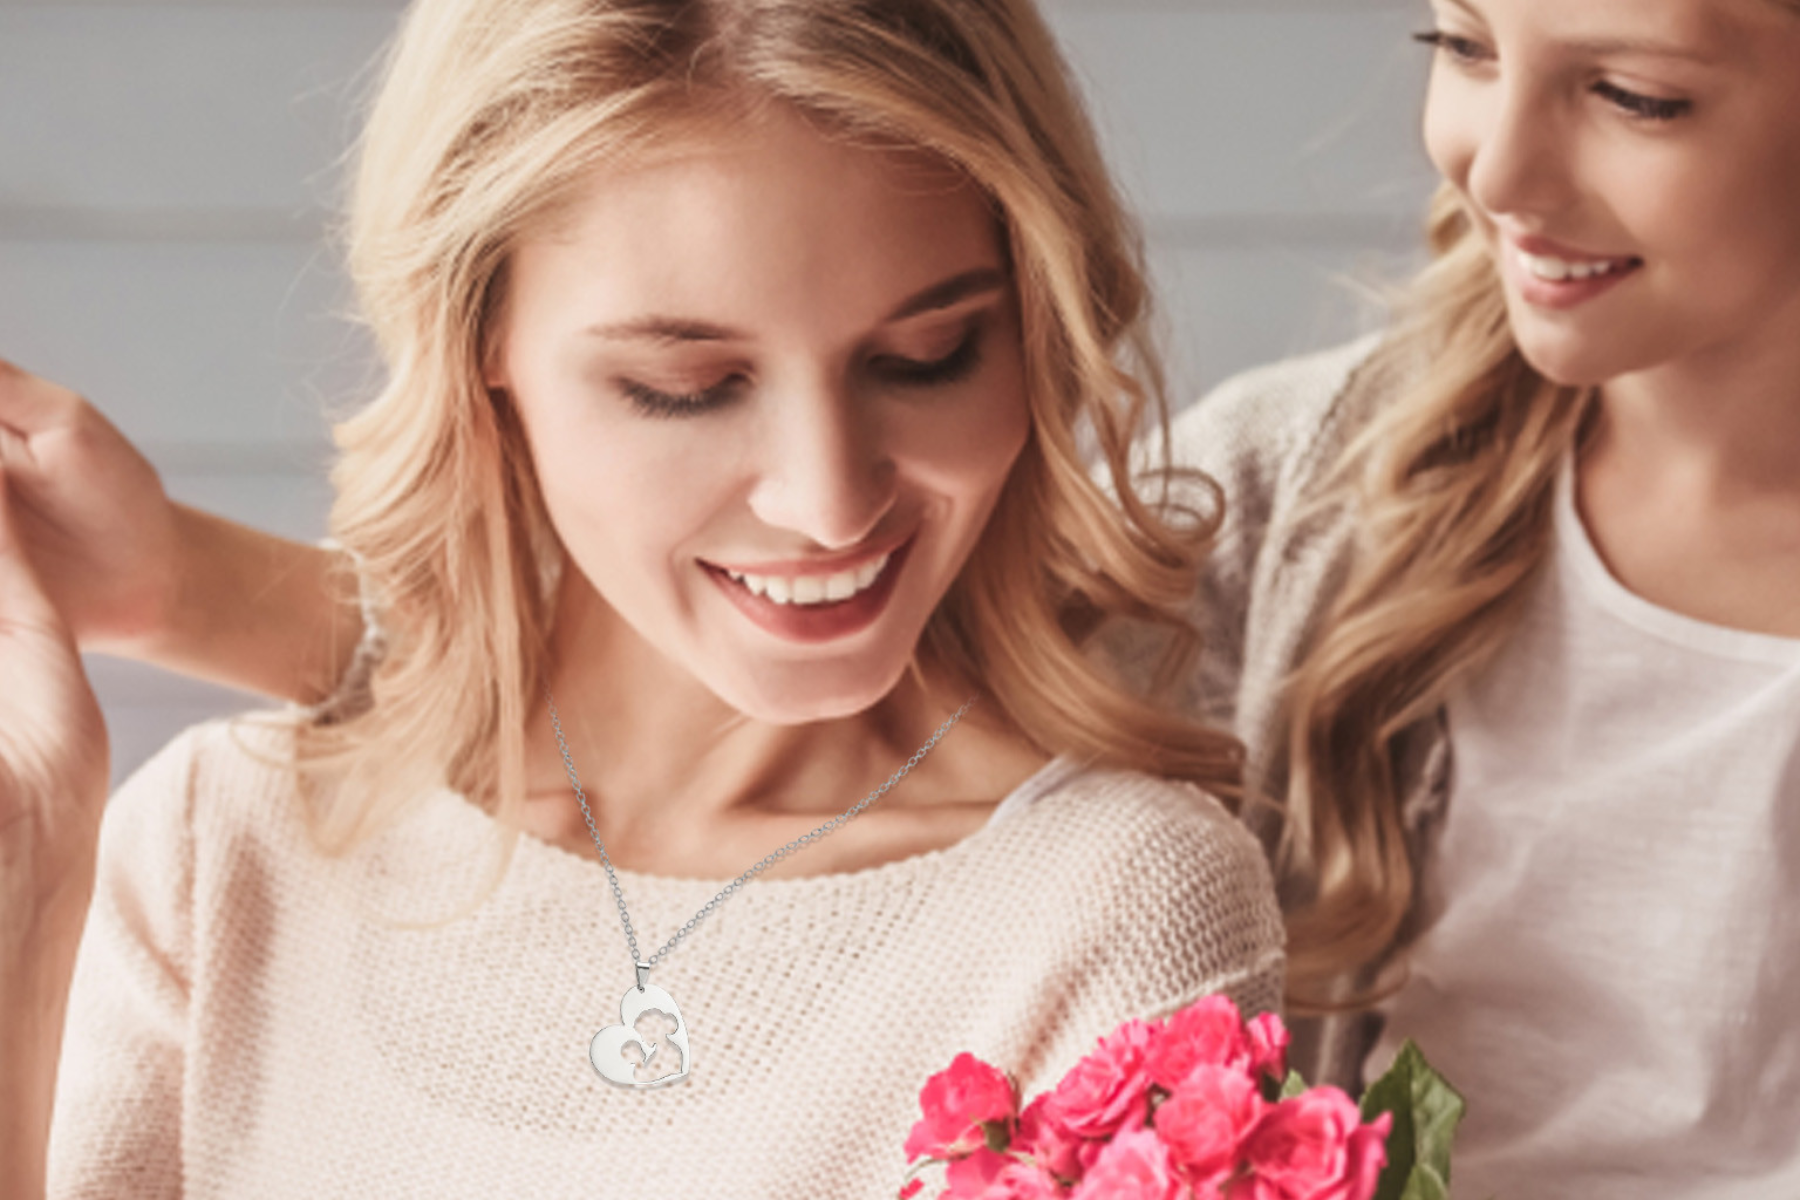 Make Her Day Shine With Platinum Jewelry For Mother's Day